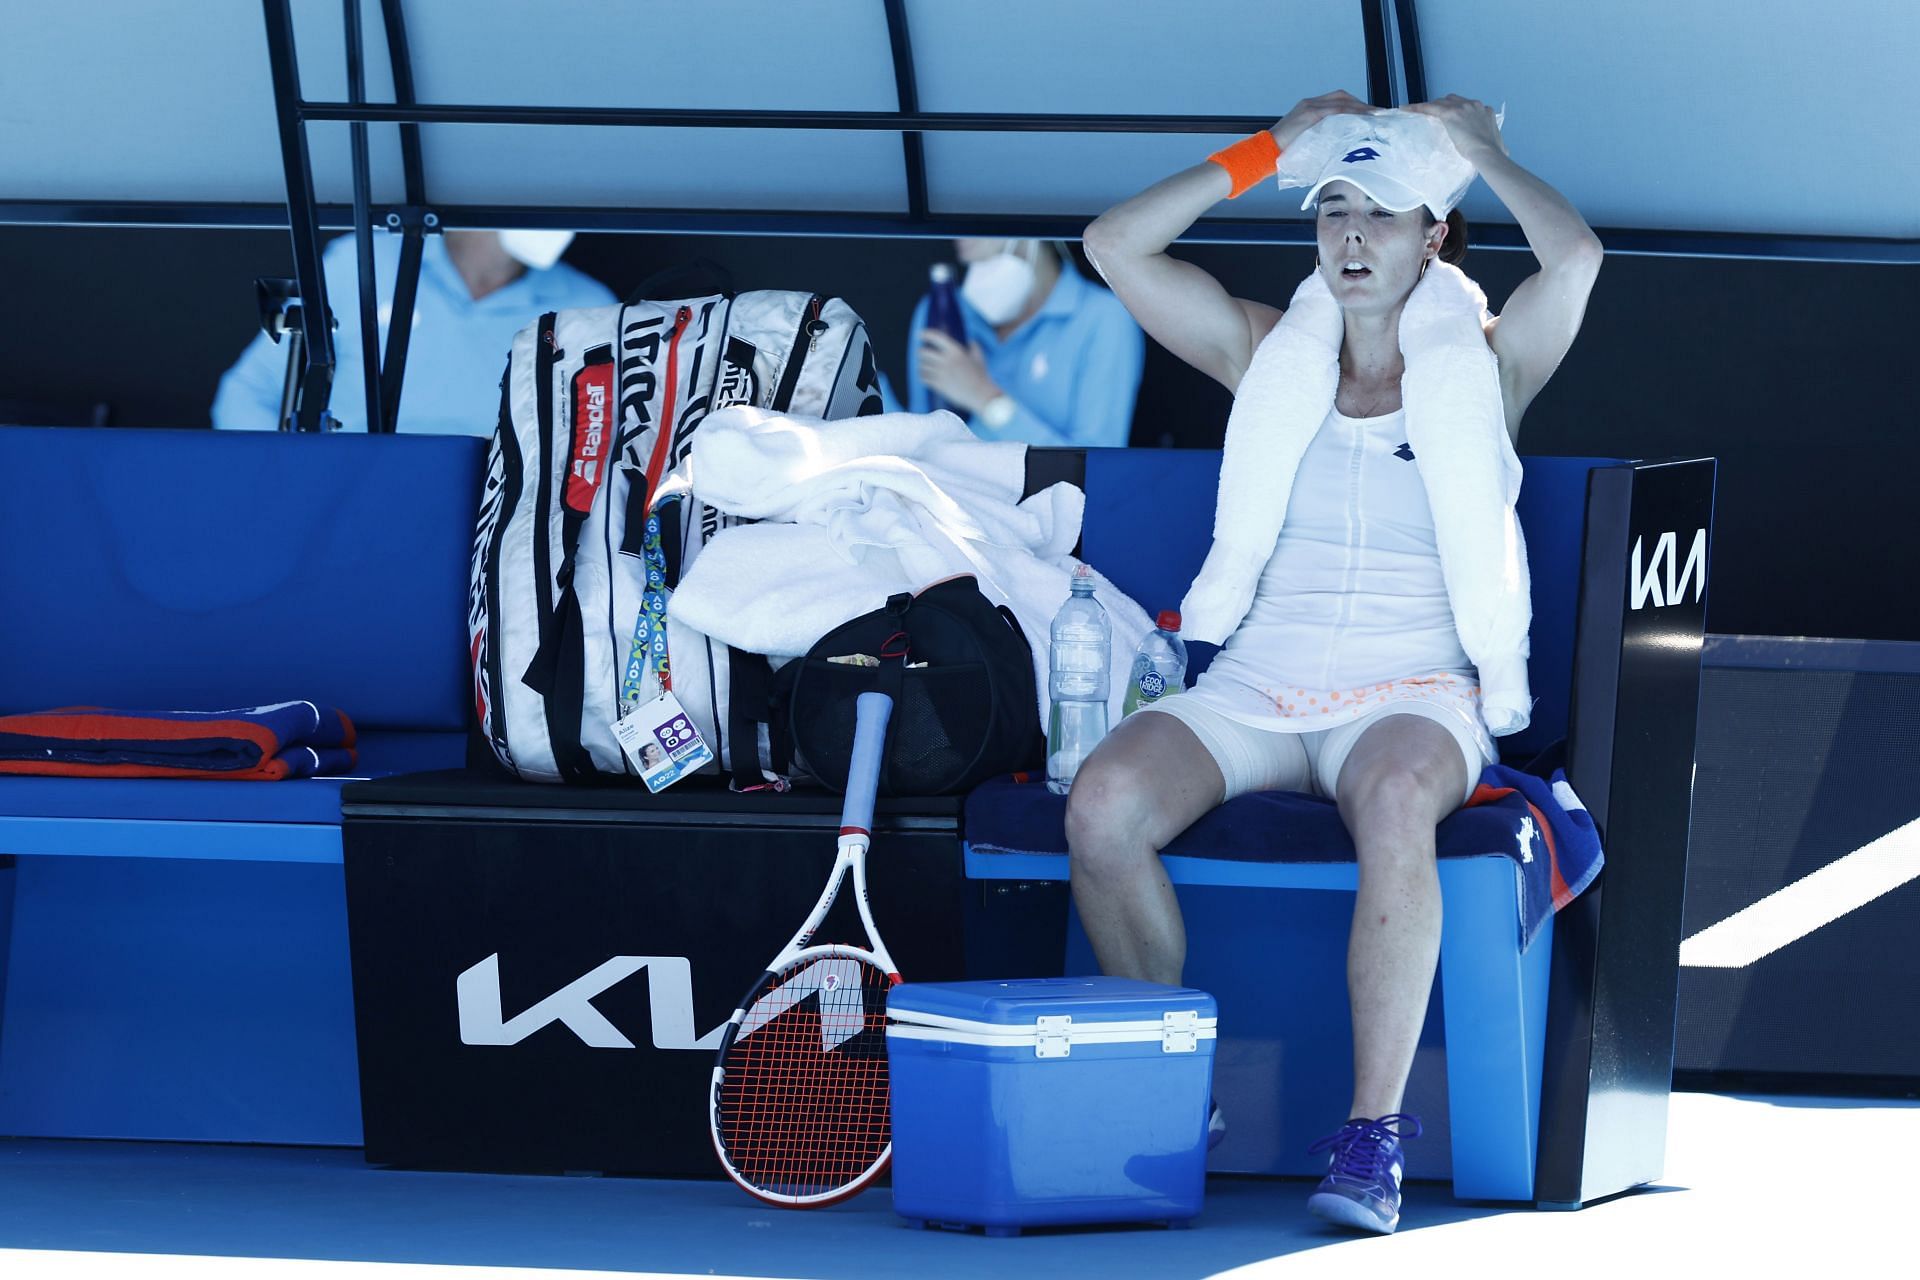 Cornet tries to cool herself during her match at the 2022 Australian Open.